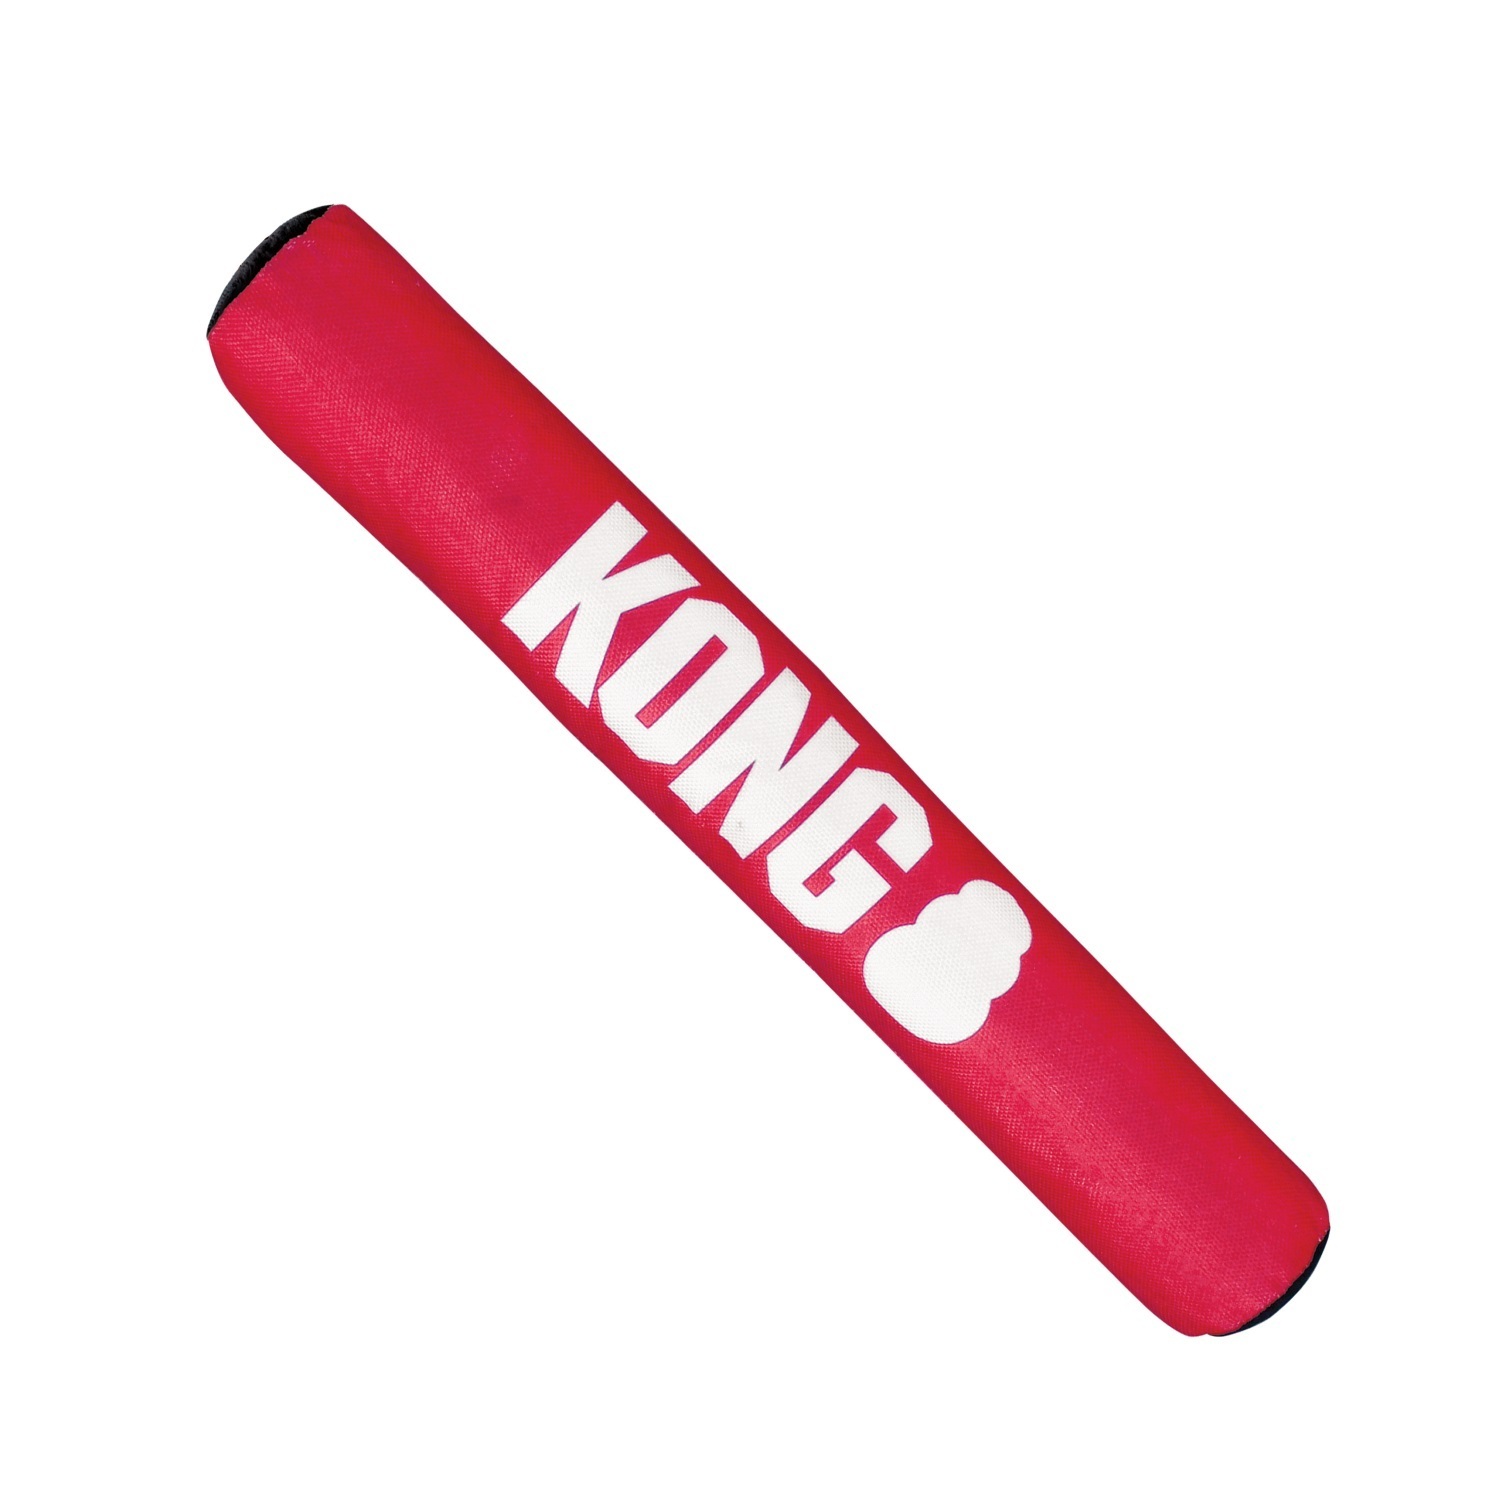 3 x KONG Signature Stick - Safe Fetch Toy with Rattle & Squeak for Dogs - Medium image 0